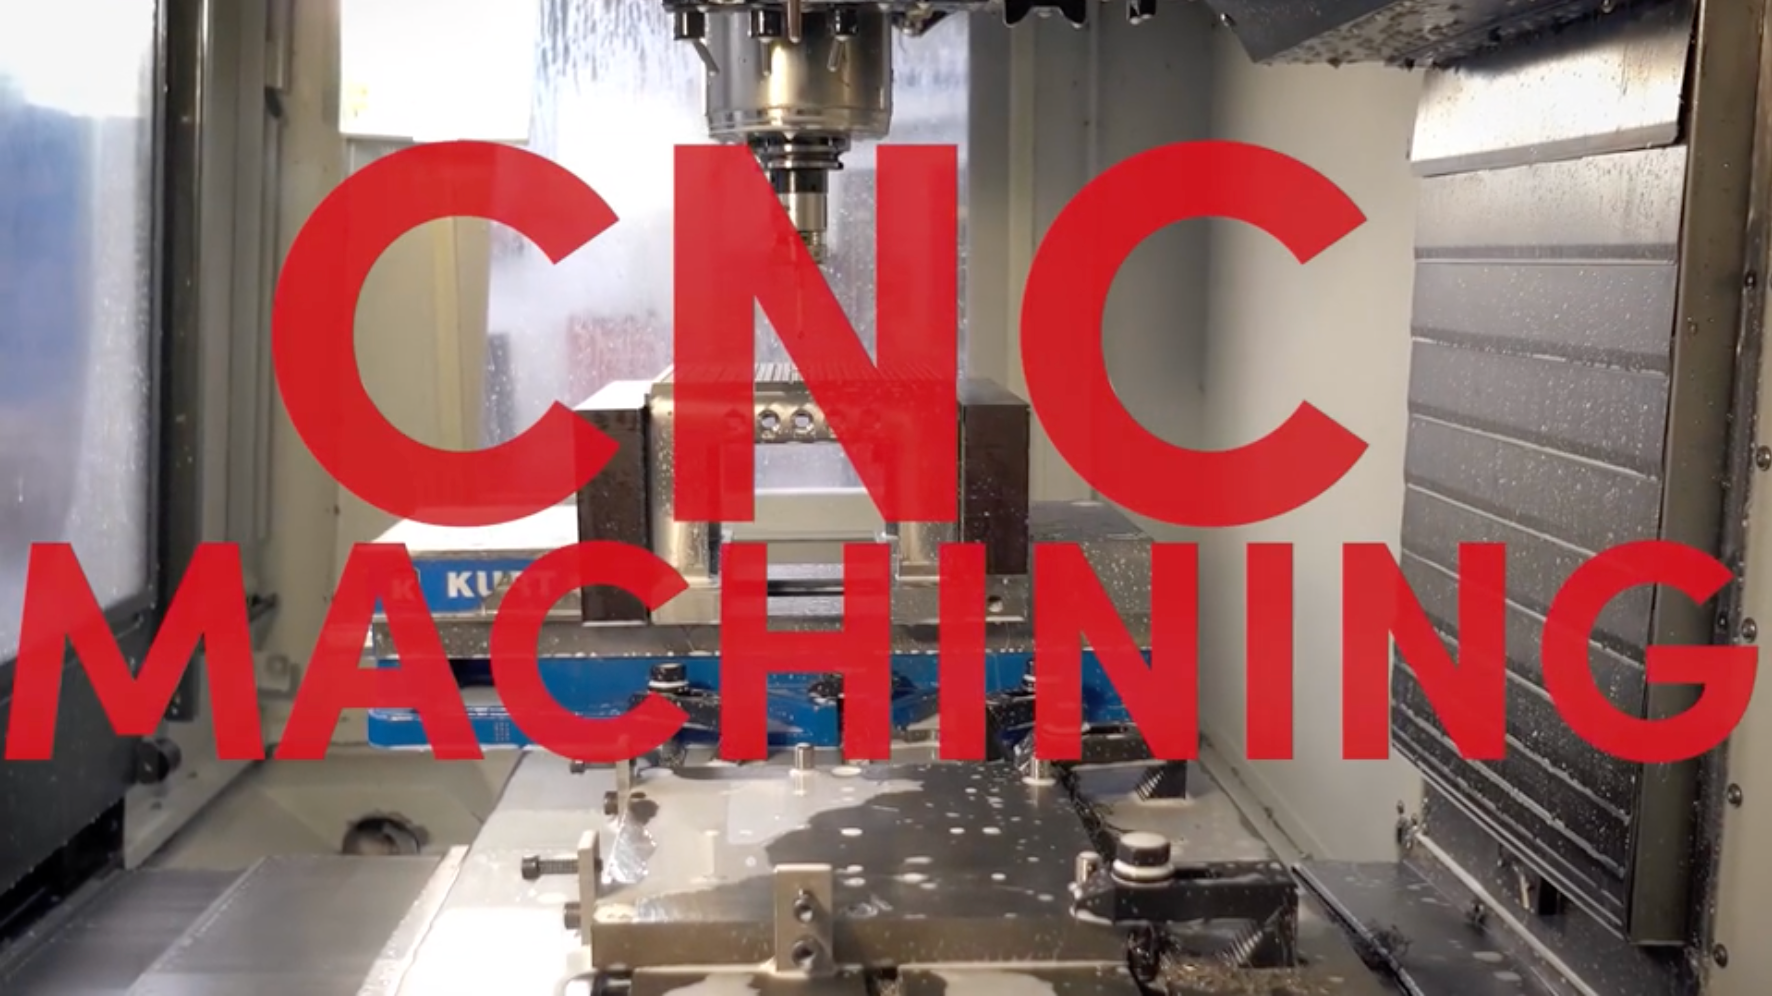 5-Axis CNC and More